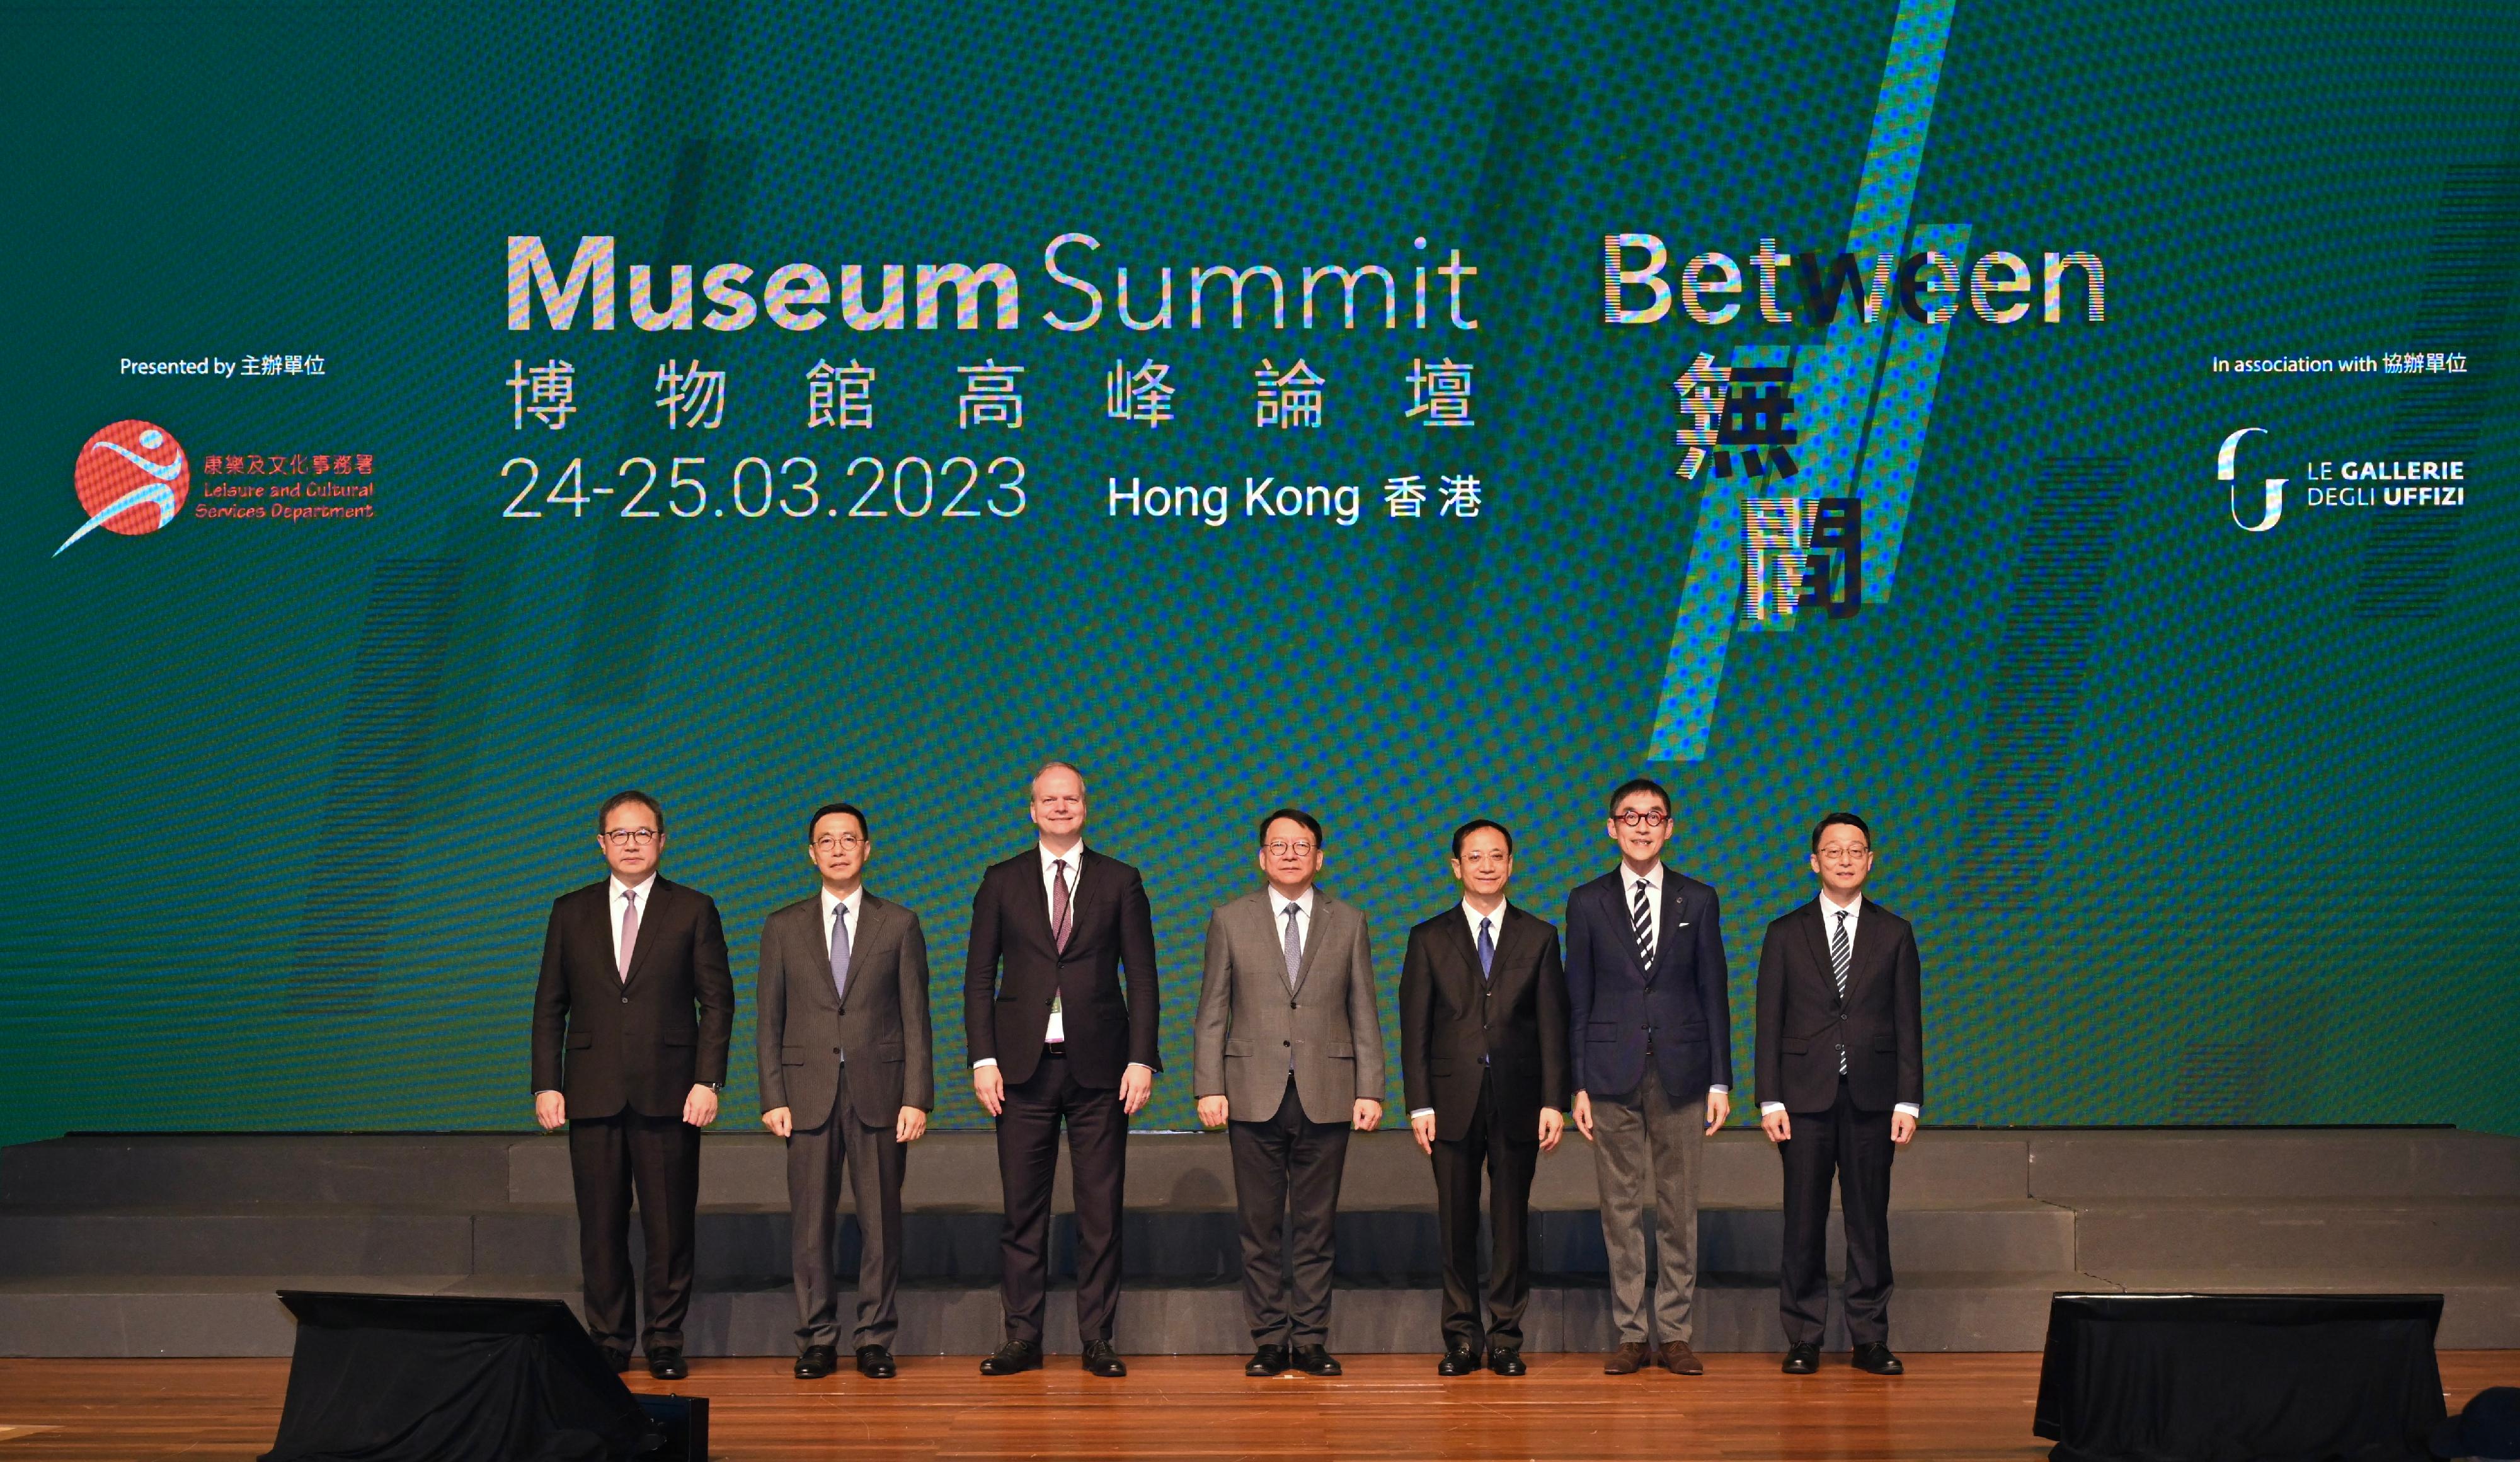 The opening ceremony of the Museum Summit 2023 was held today (March 24) at the Hong Kong Convention and Exhibition Centre. Photo shows (from left) the Permanent Secretary for Culture, Sports and Tourism, Mr Joe Wong; the Secretary for Culture, Sports and Tourism, Mr Kevin Yeung; the Director of Gallerie degli Uffizi (Italy), Dr Eike Schmidt; the Chief Secretary for Administration, Mr Chan Kwok-ki; Deputy Administrator of the National Cultural Heritage Administration (China) Mr Gu Yucai; the Chairman of the Museum Advisory Committee, Mr Douglas So; and the Director of Leisure and Cultural Services, Mr Vincent Liu, at the ceremony.